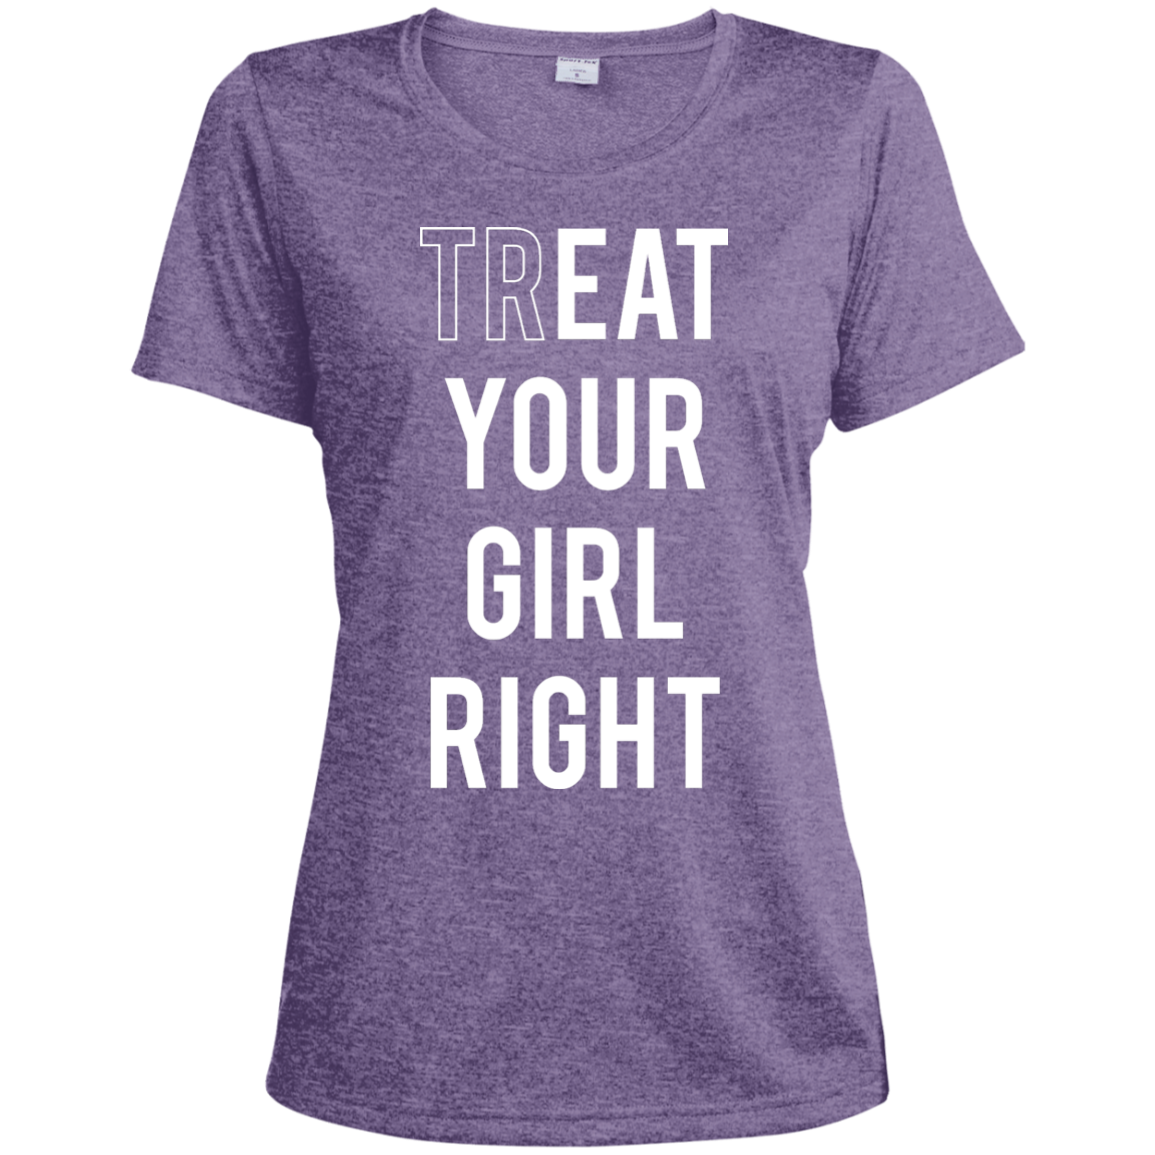 purple funny quoted tshirt for girls/women/lesbian